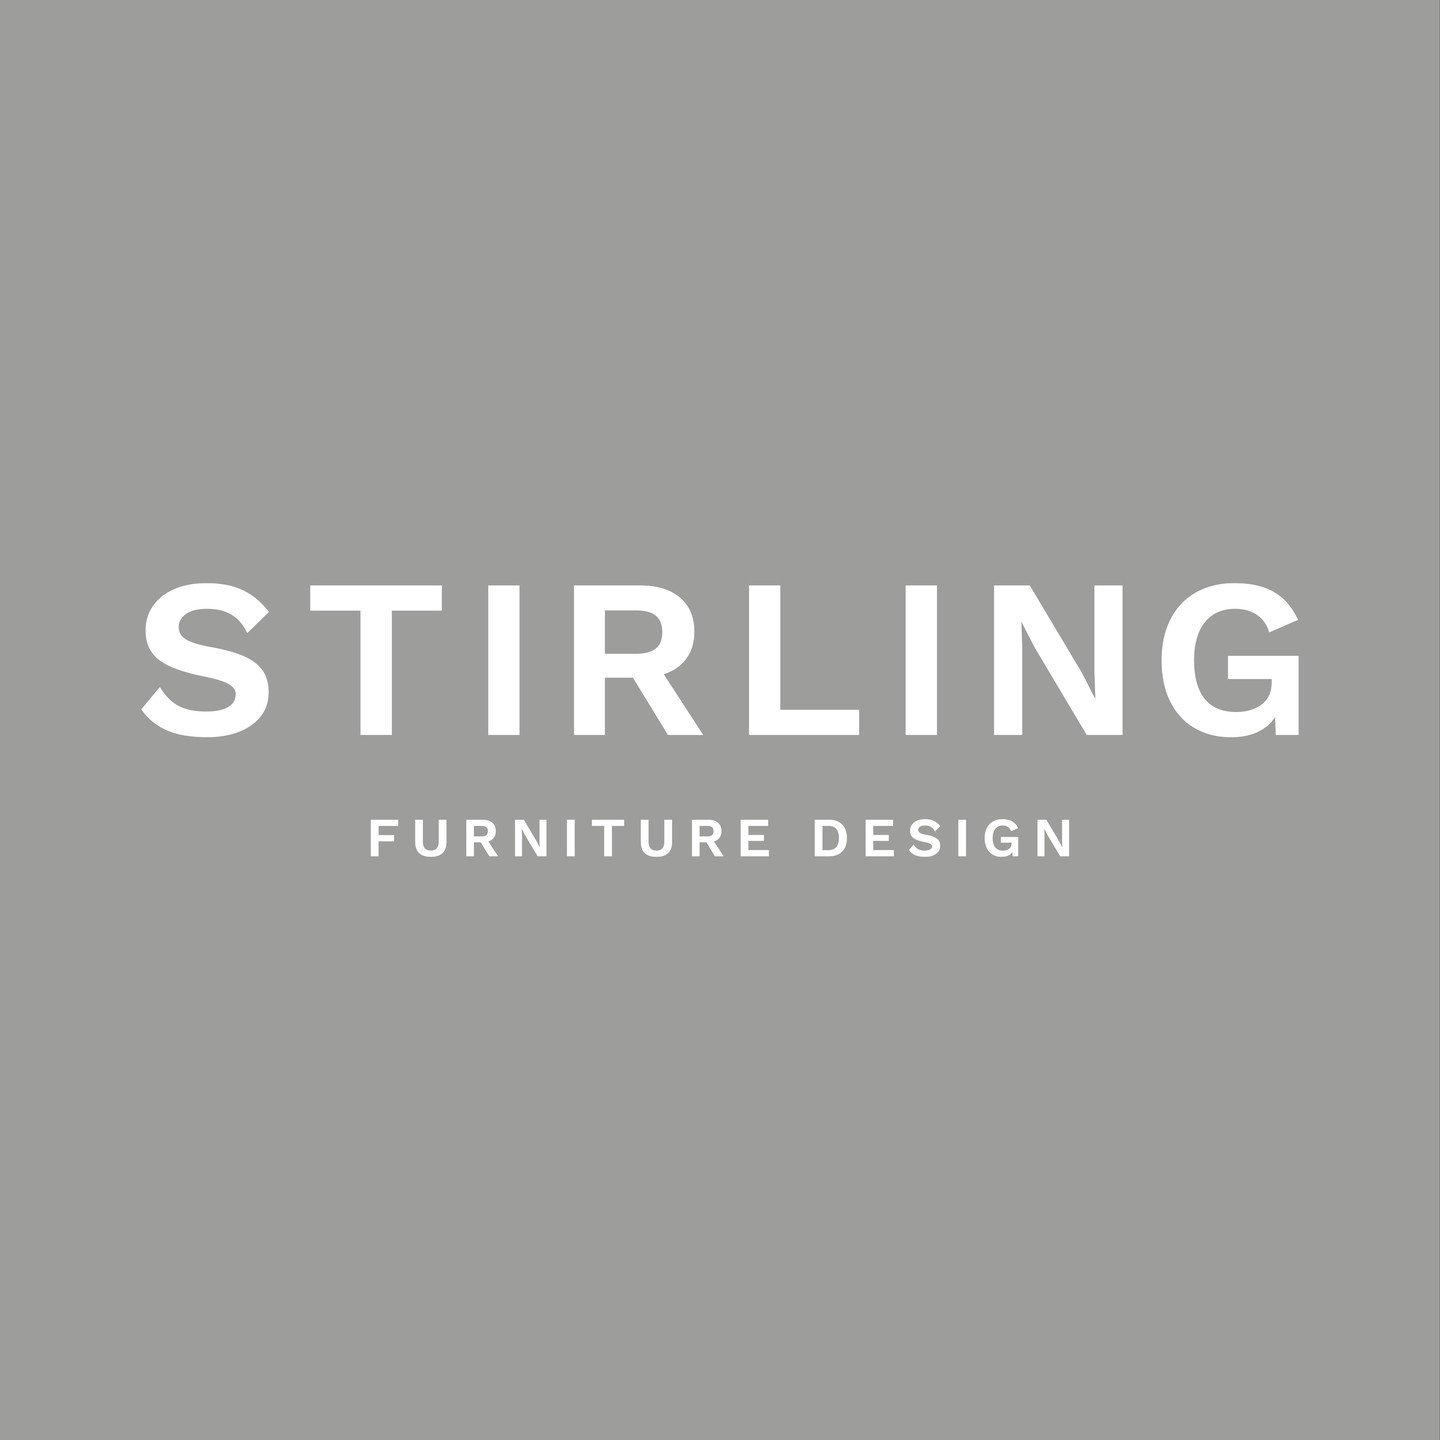 Throwing it back to the amazing branding we created for @stirlingfurniture! ✨ 

We loved bringing their vision to life, realigning the brand values and crafting an identity that truly resonates with their audience. 

If you feel like your branding is